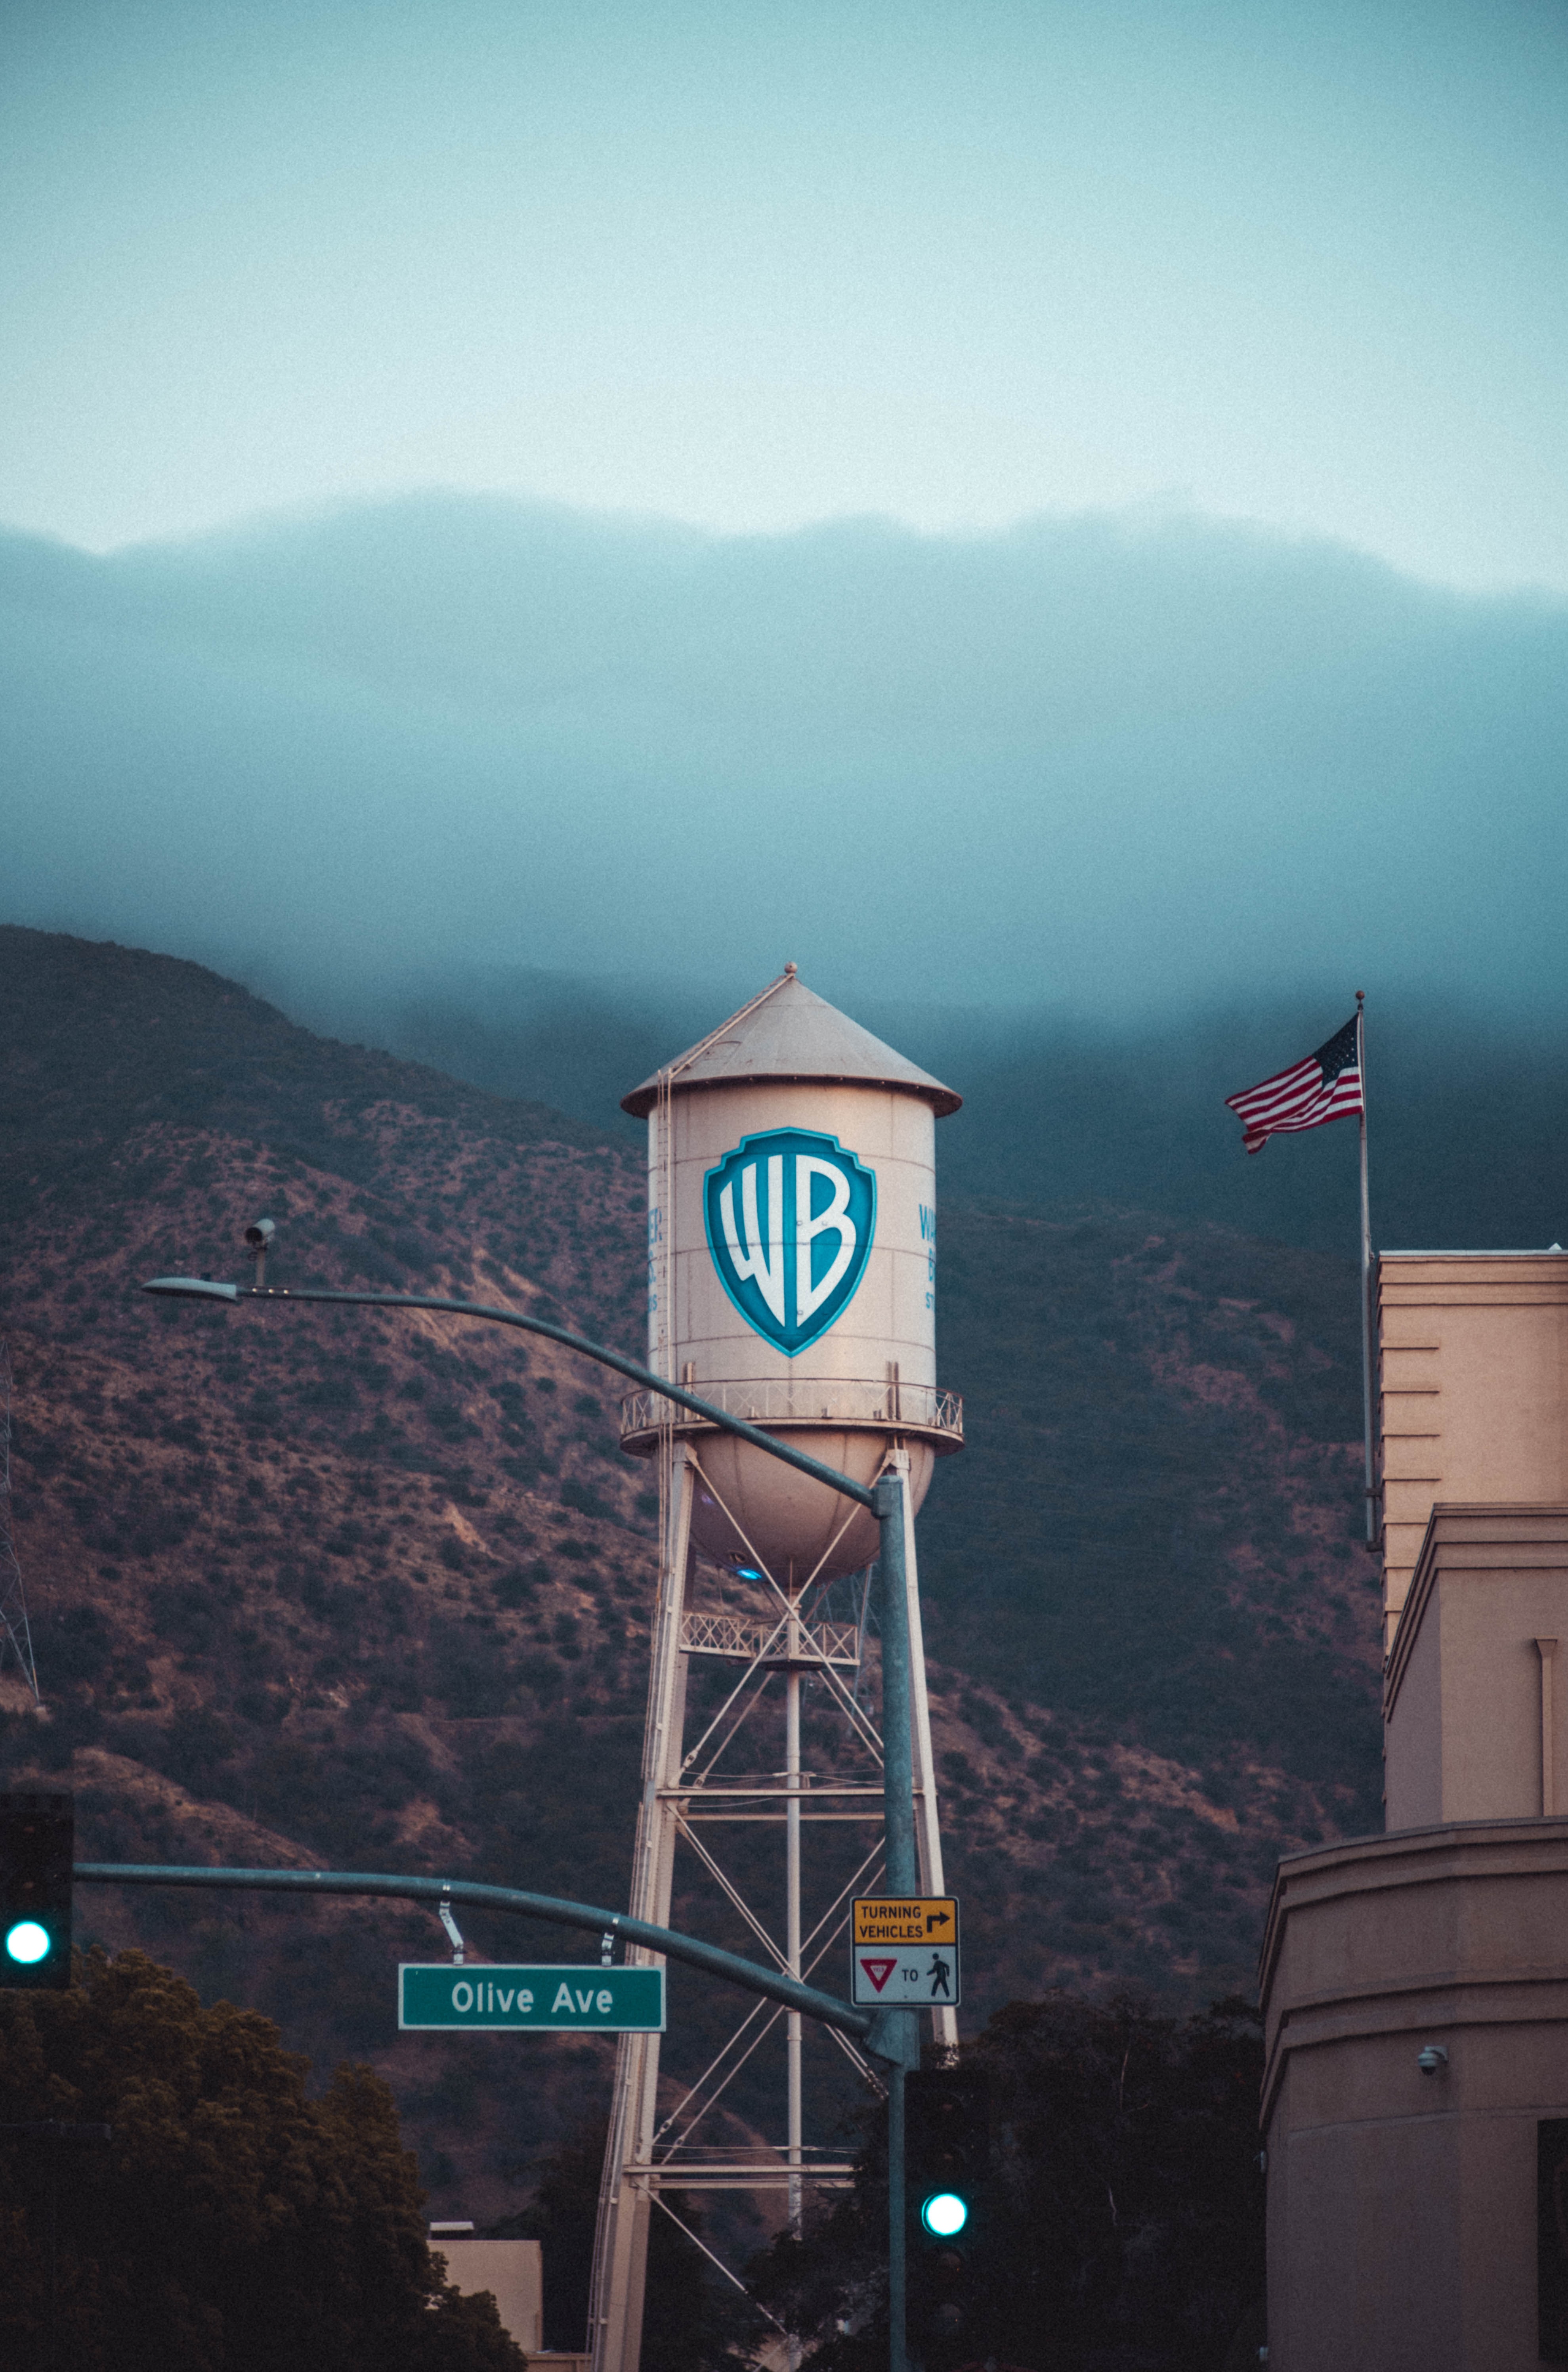 Strikes are causing troubles for Warner Bros.